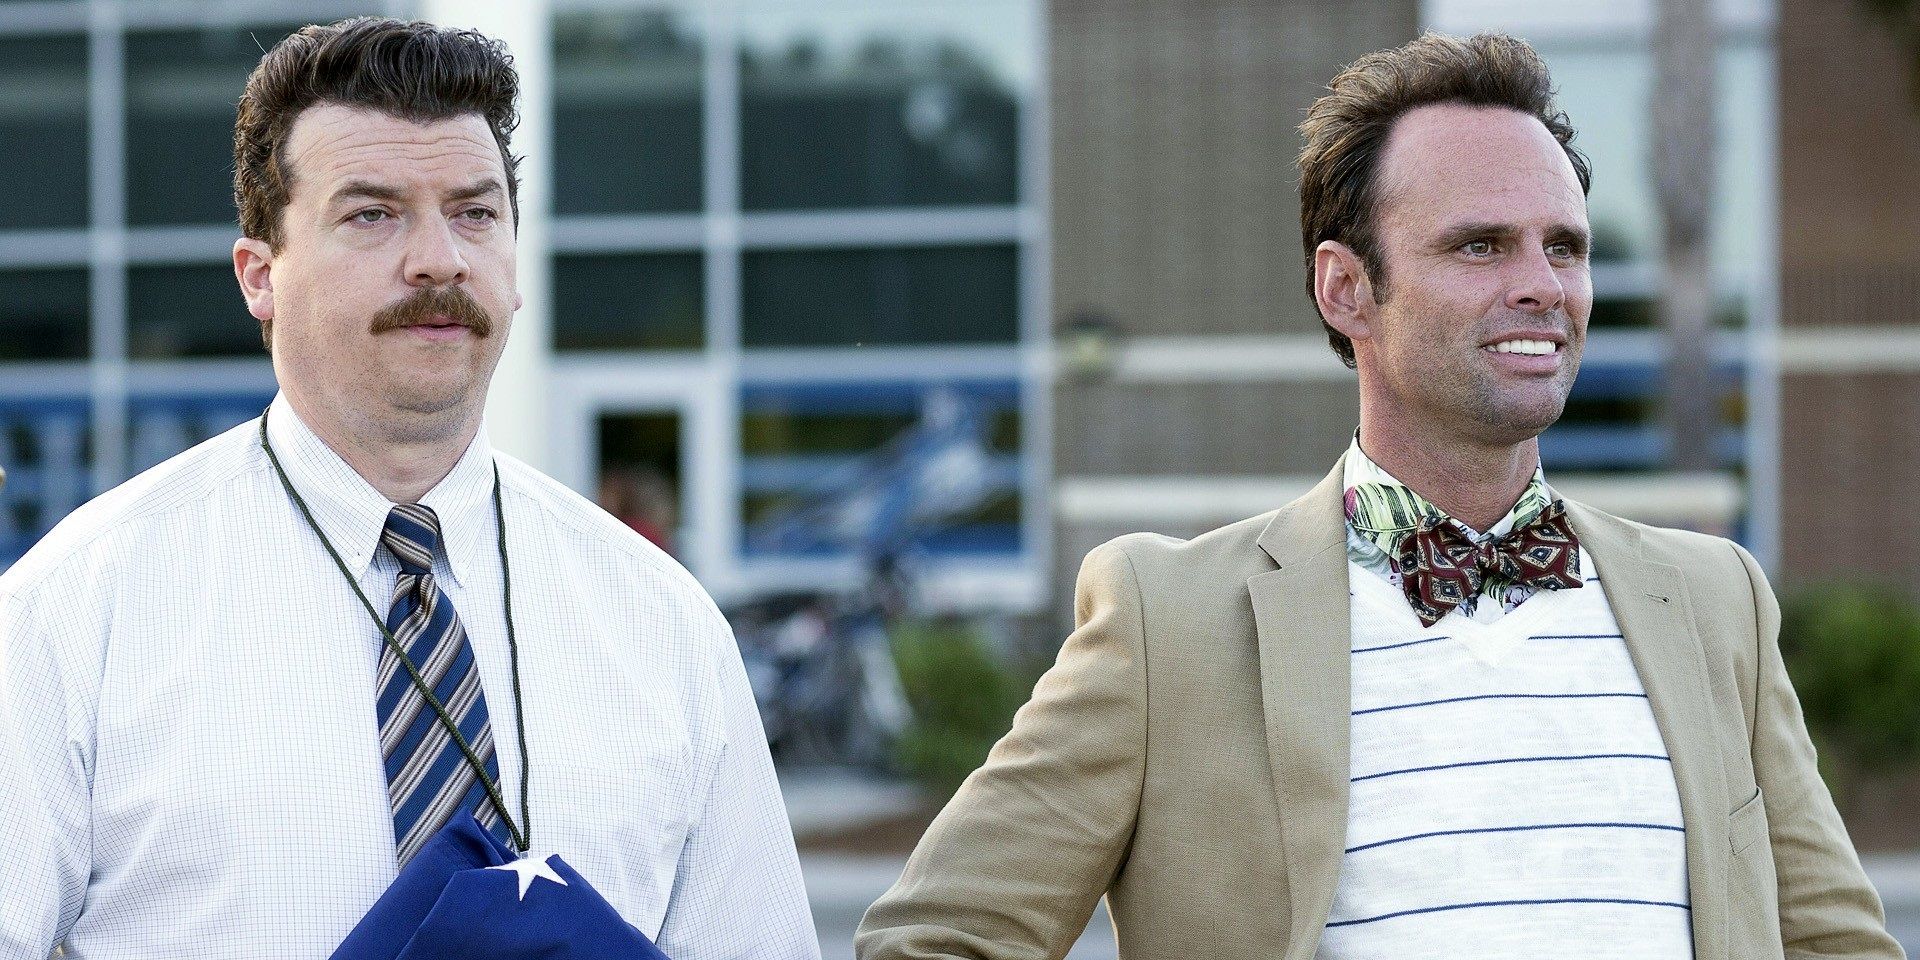 Neal and Lee stand together outside the school in Vice Principals